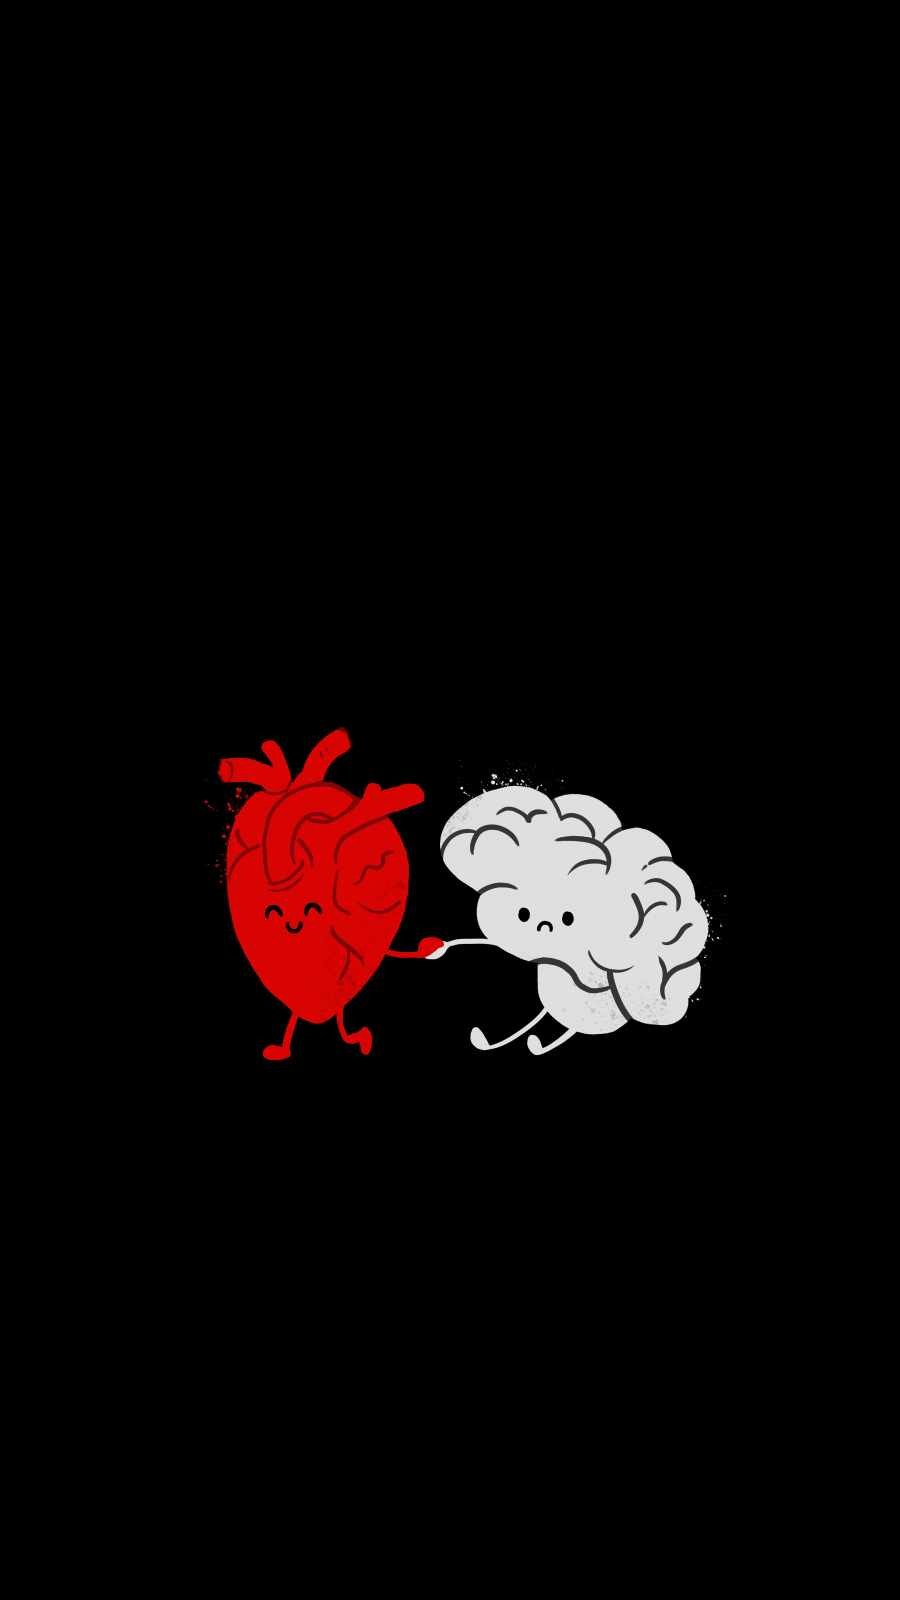 Heart With Brain IPhone Wallpaper HD  IPhone Wallpapers